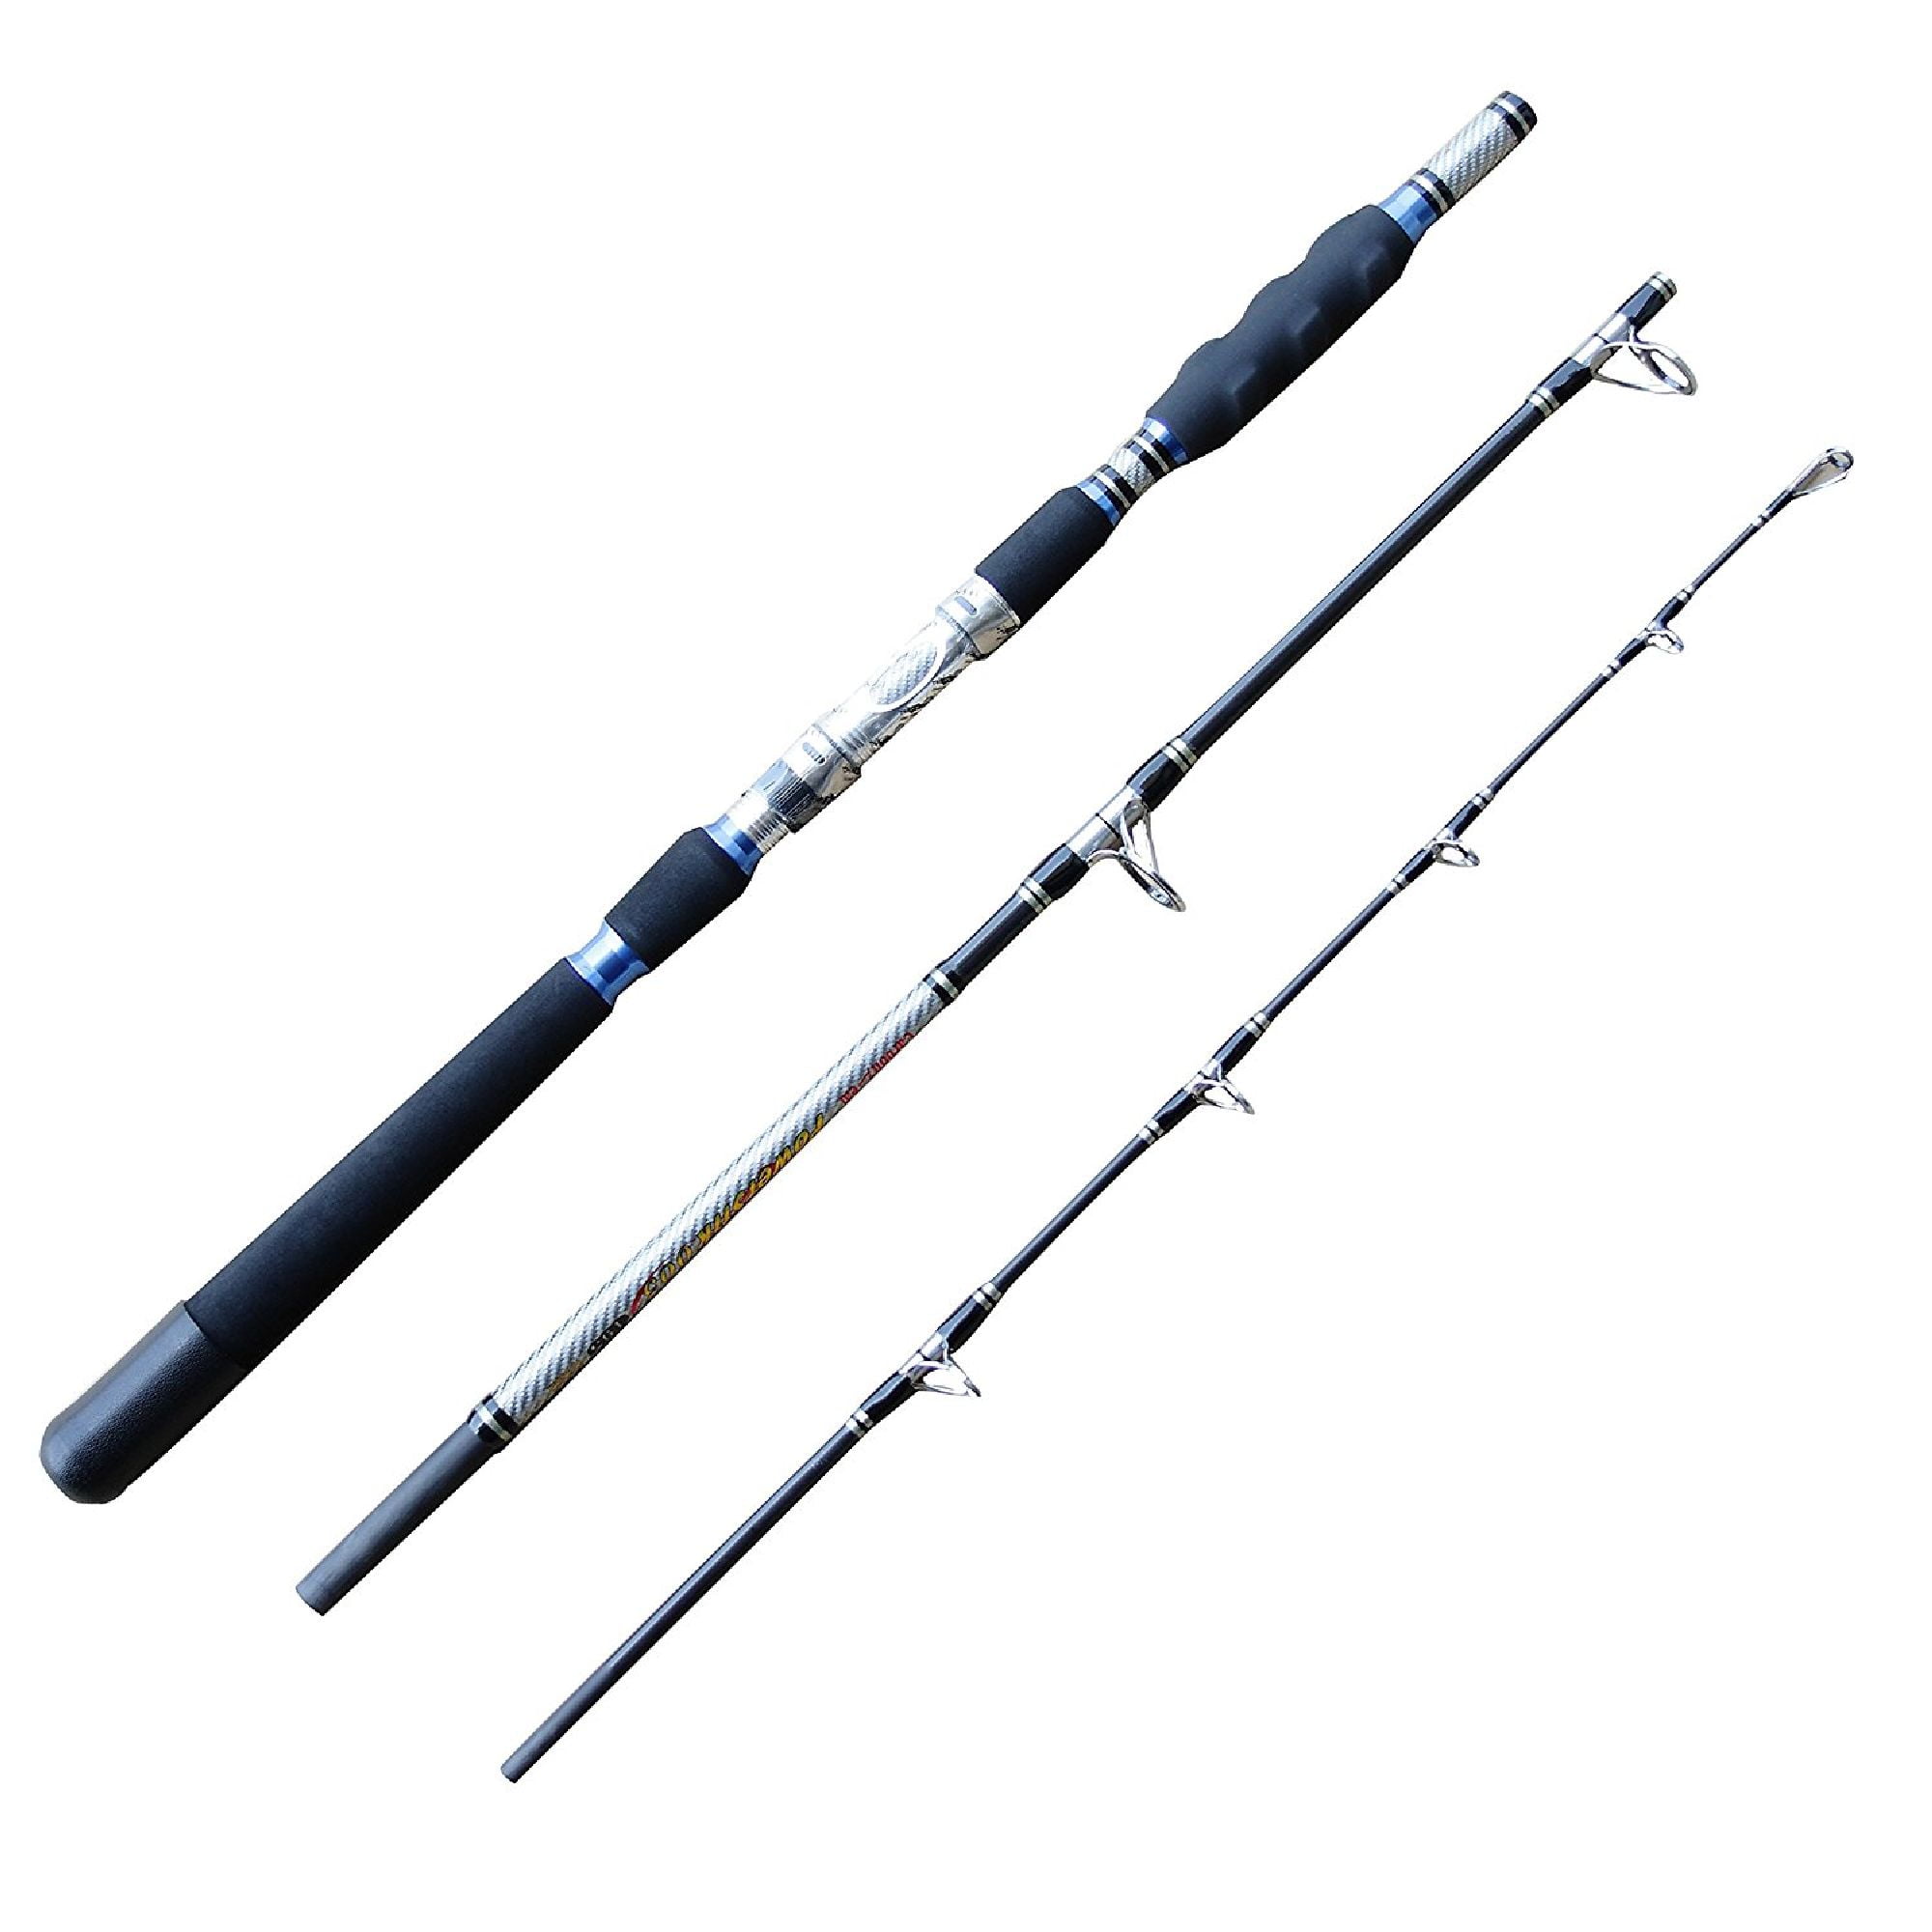 3Piece Spinning Heavy Action Portable Travel Fishing Rod Carbon Fiber Blank 